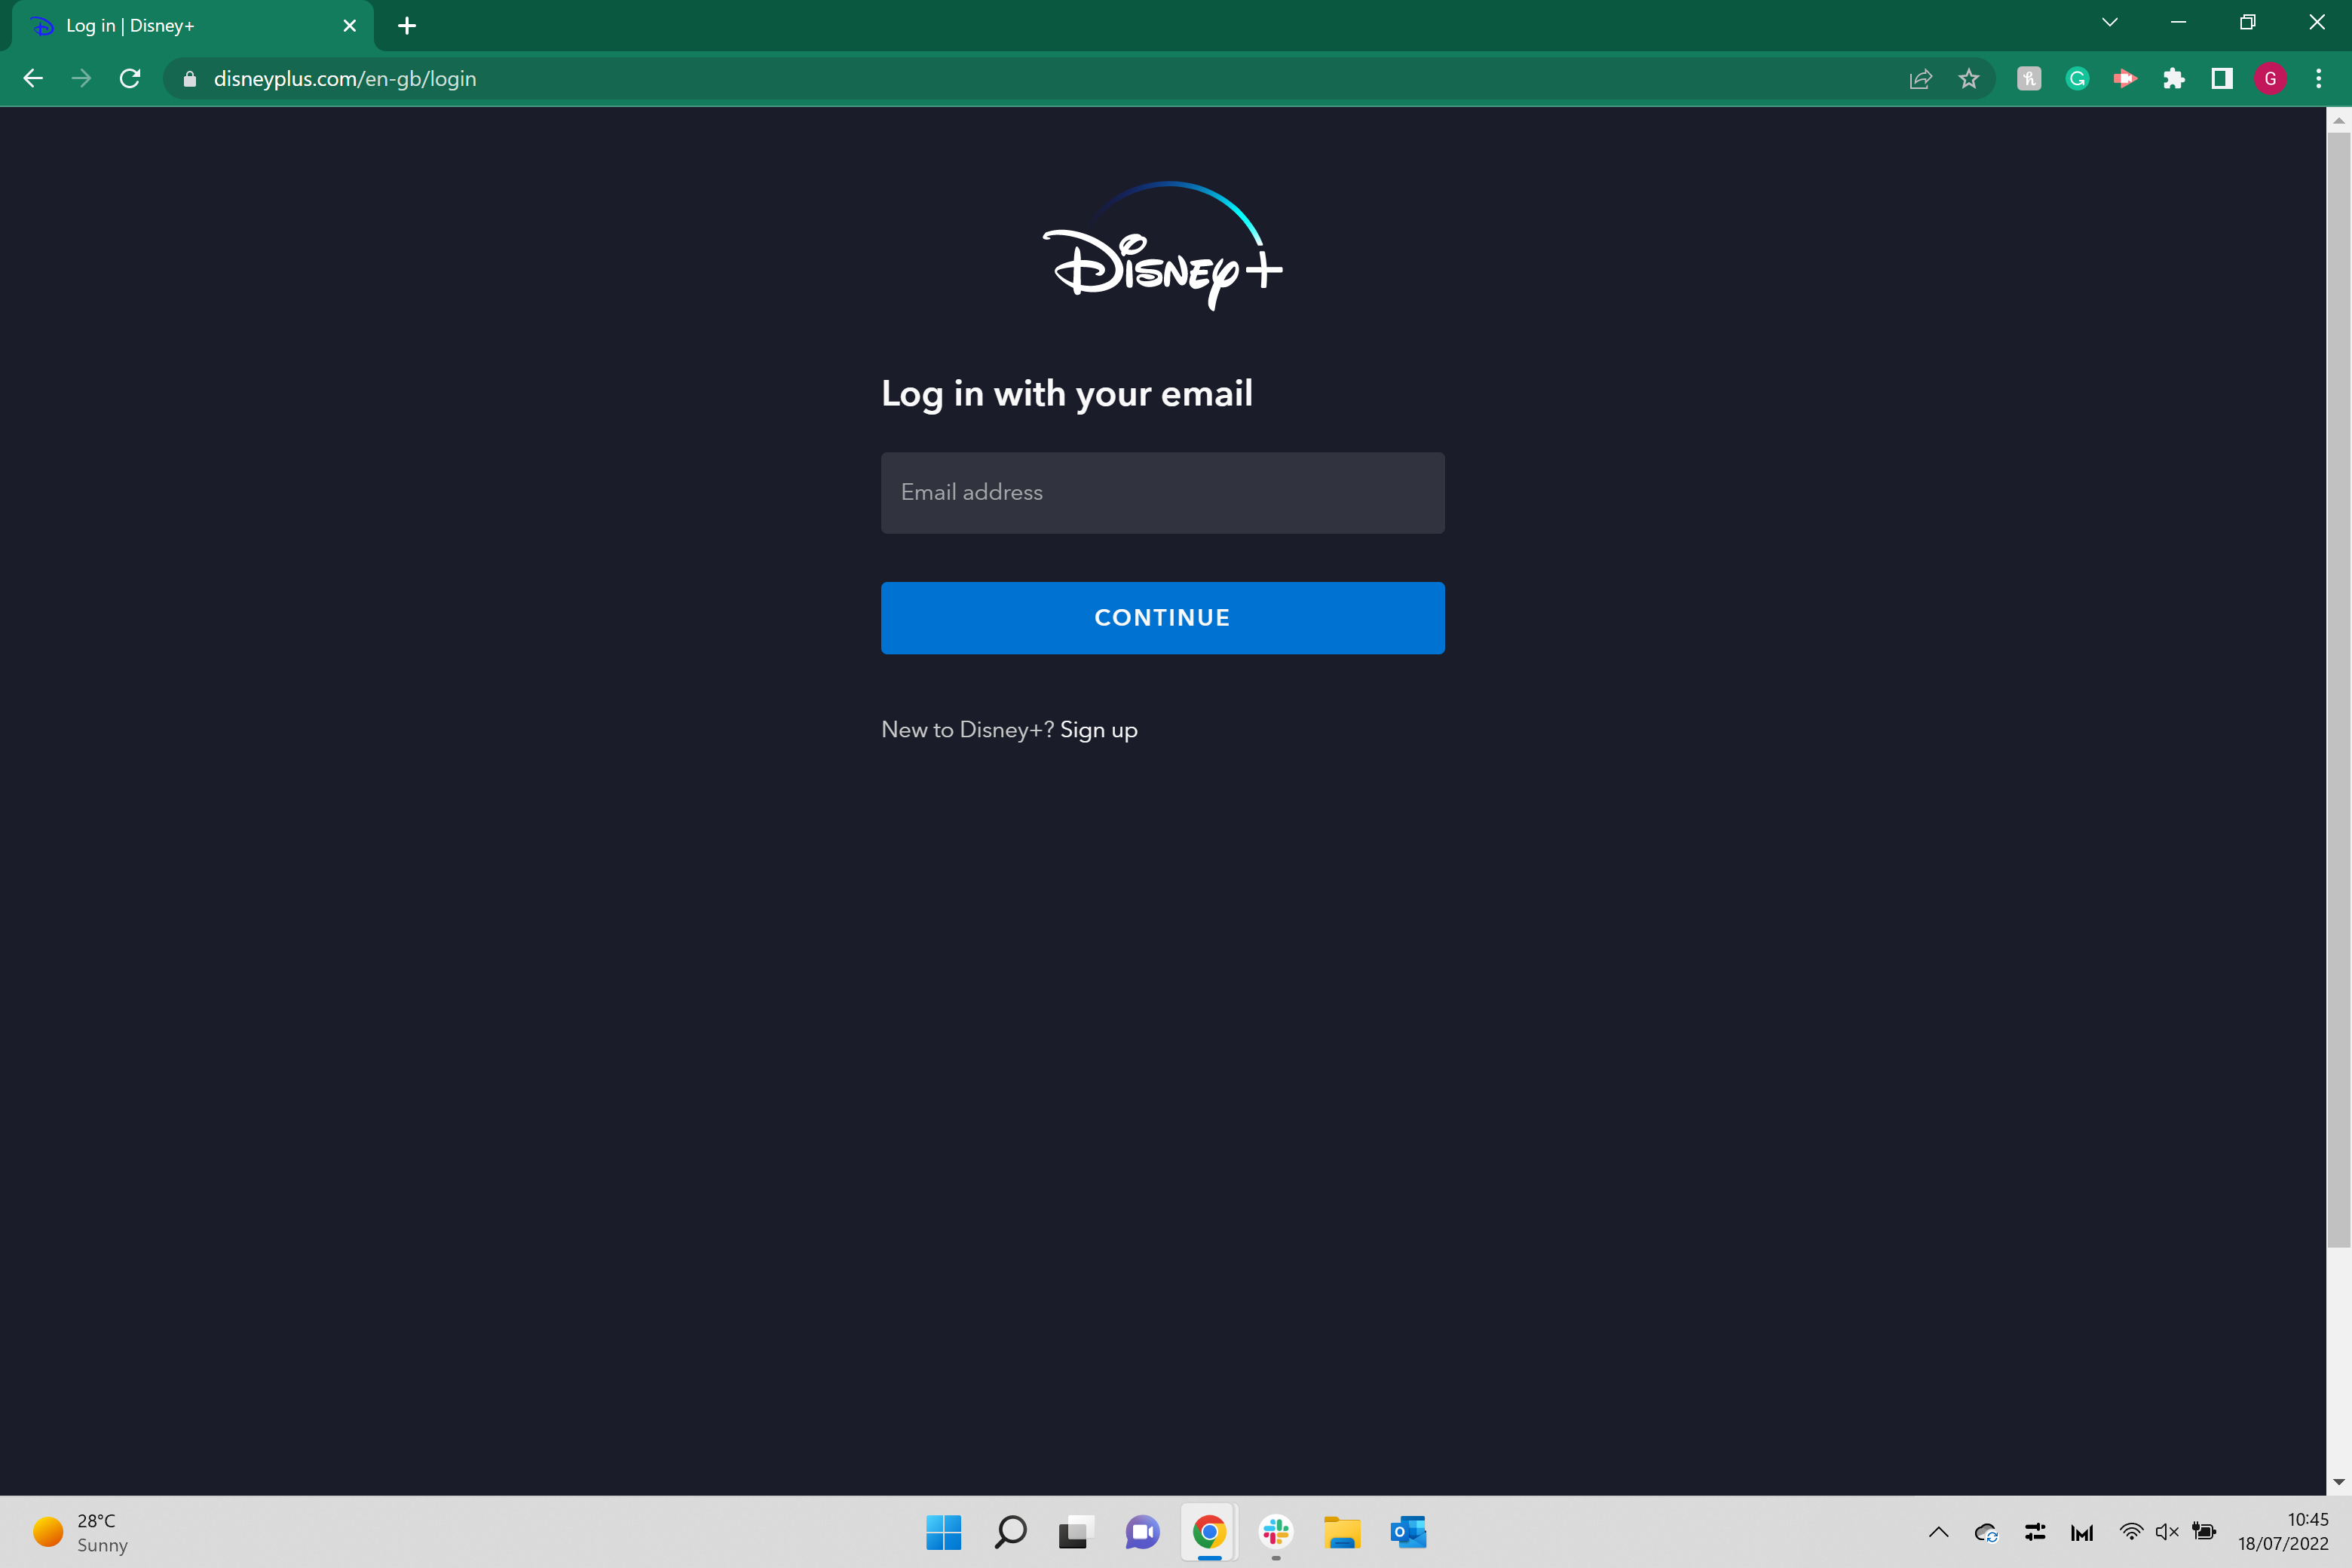 The log in screen for disney plus